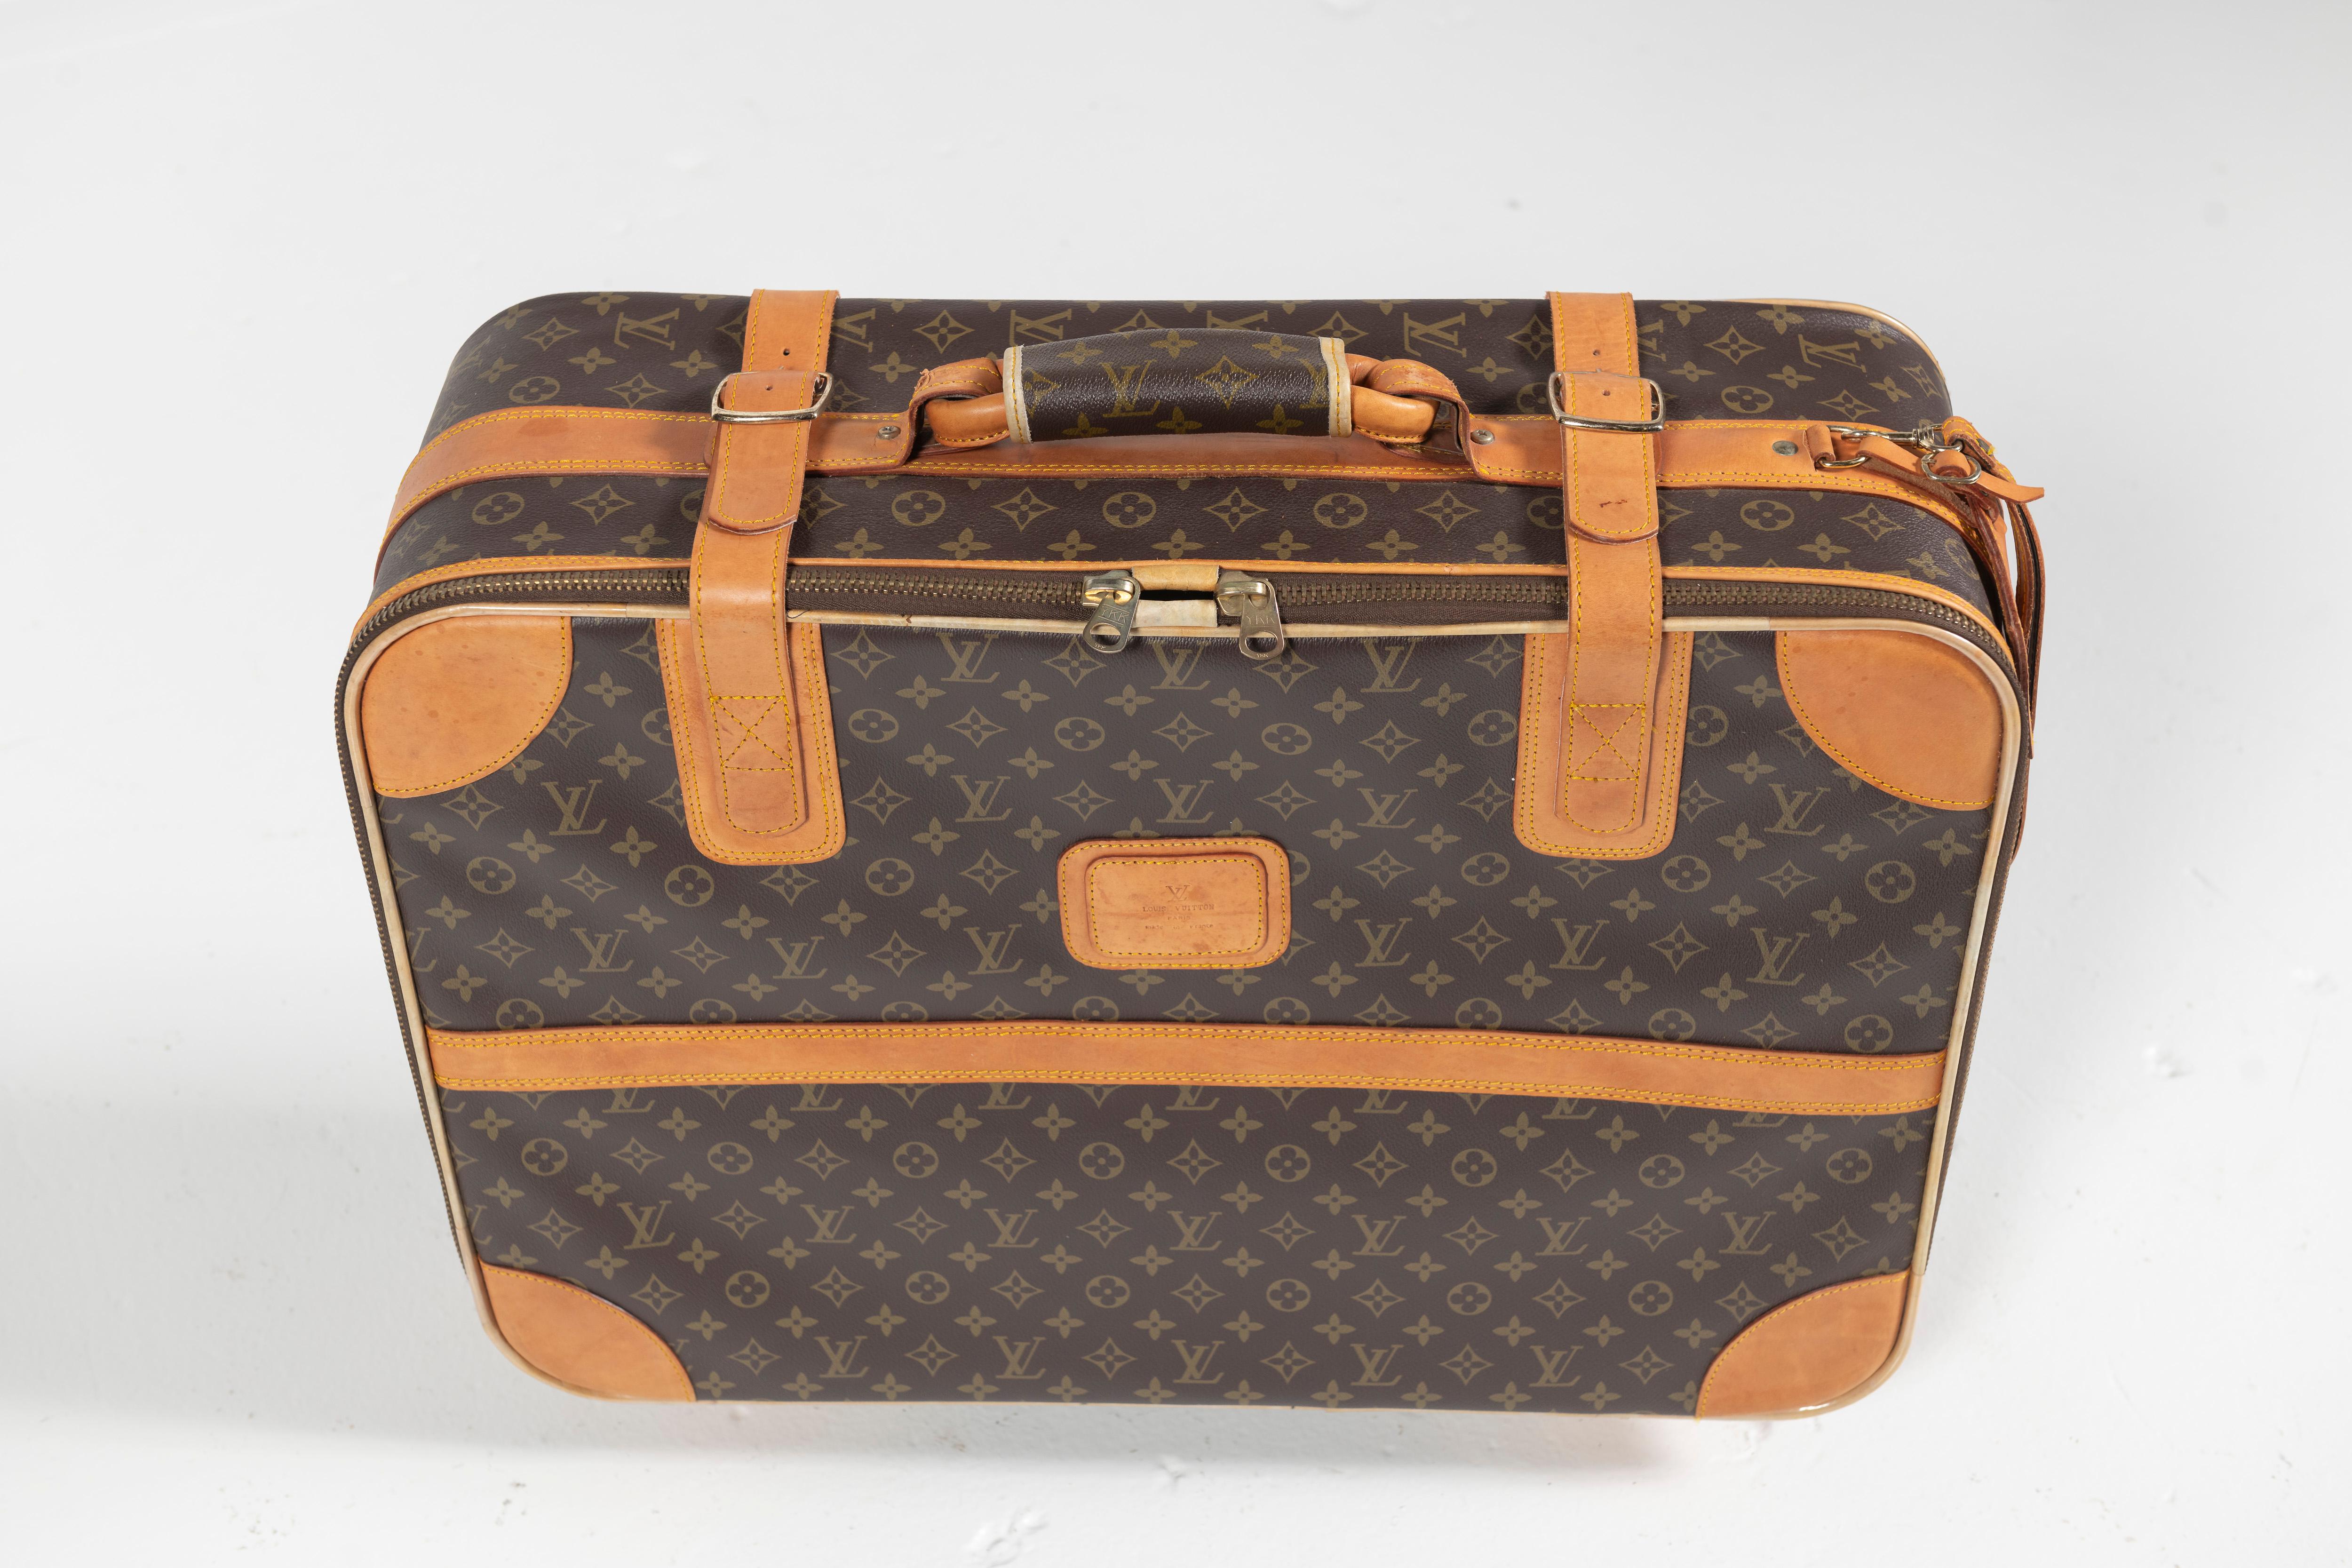 20th Century Vintage Louis Vuitton Suitcase, Monogrammed Coated Canvas, Small-Sized For Sale